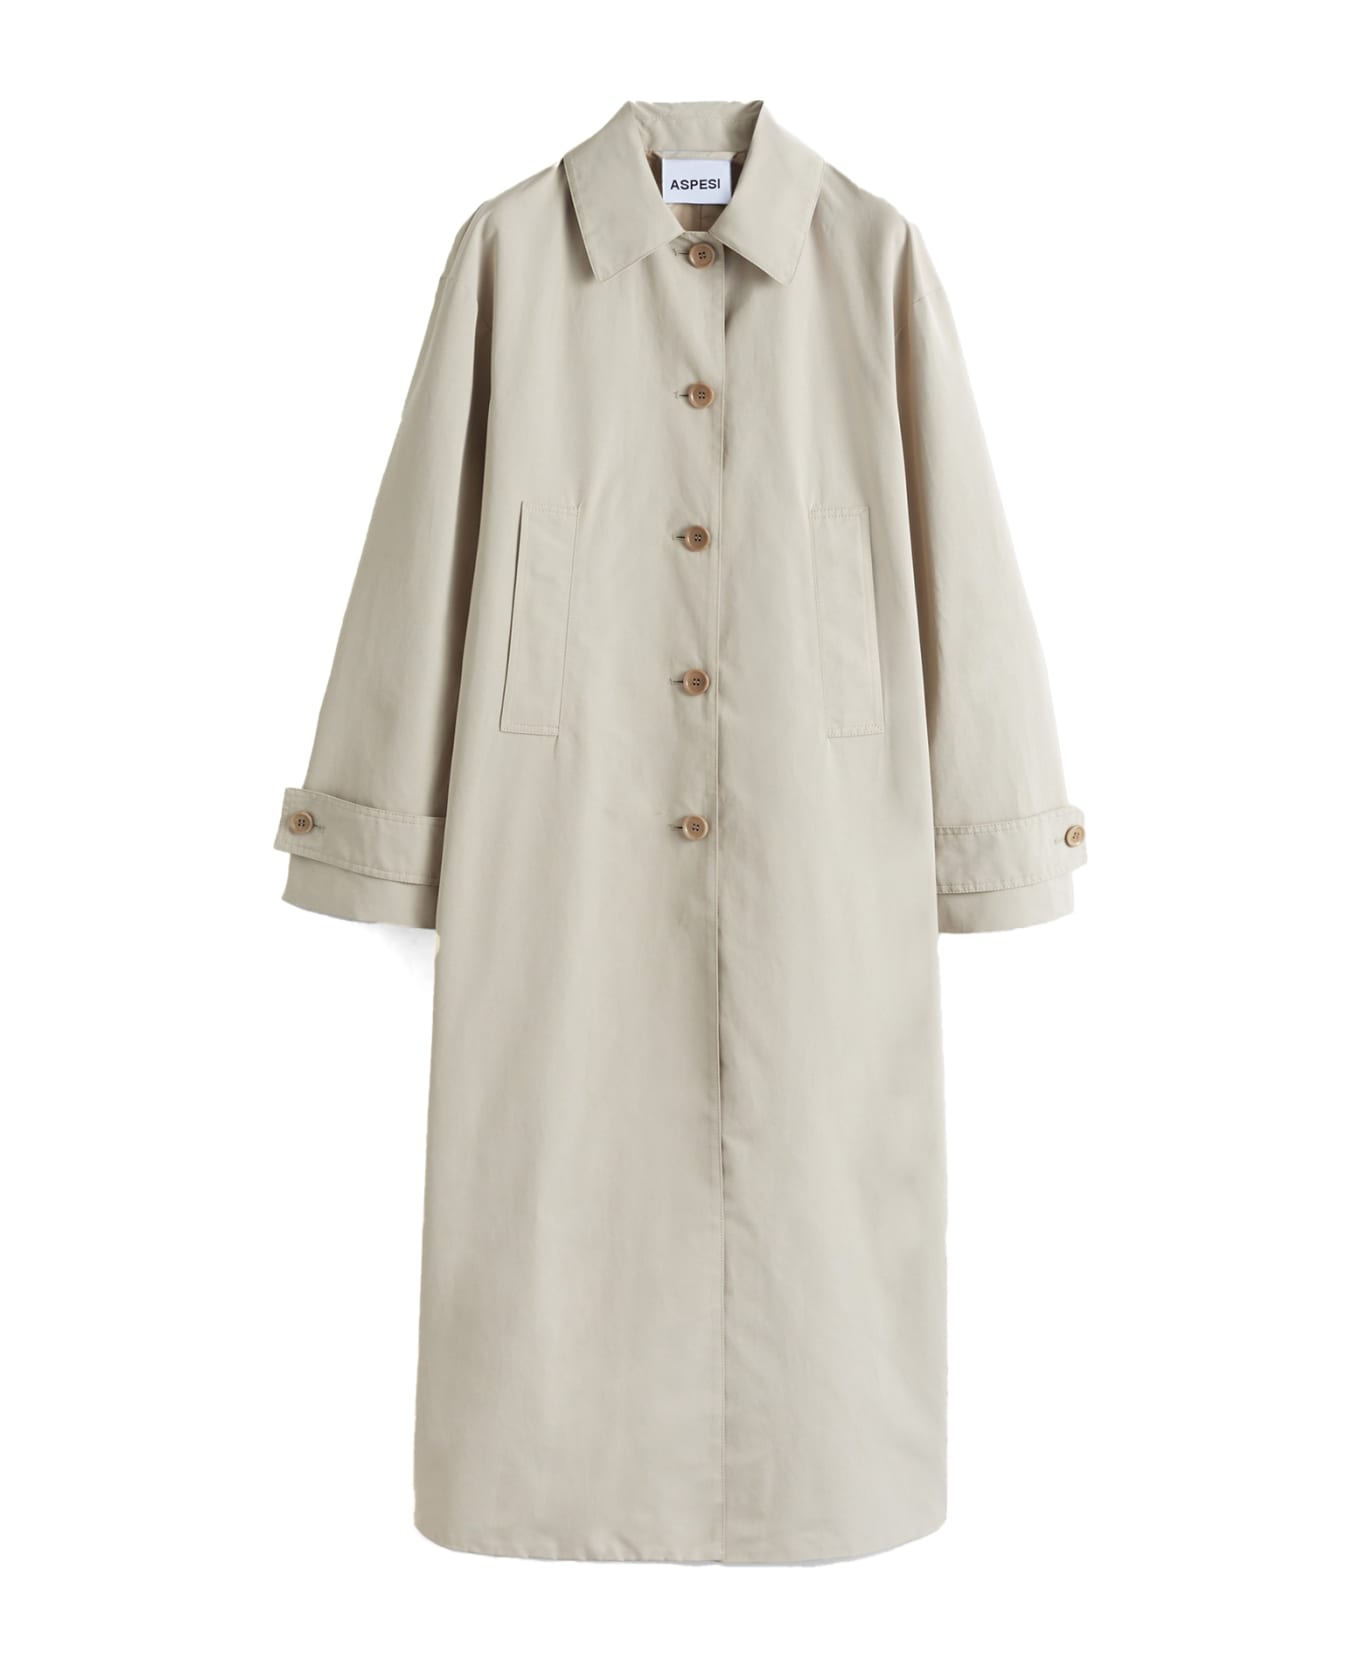 Aspesi Long Beige Trench Coat With Buttons - SABBIA